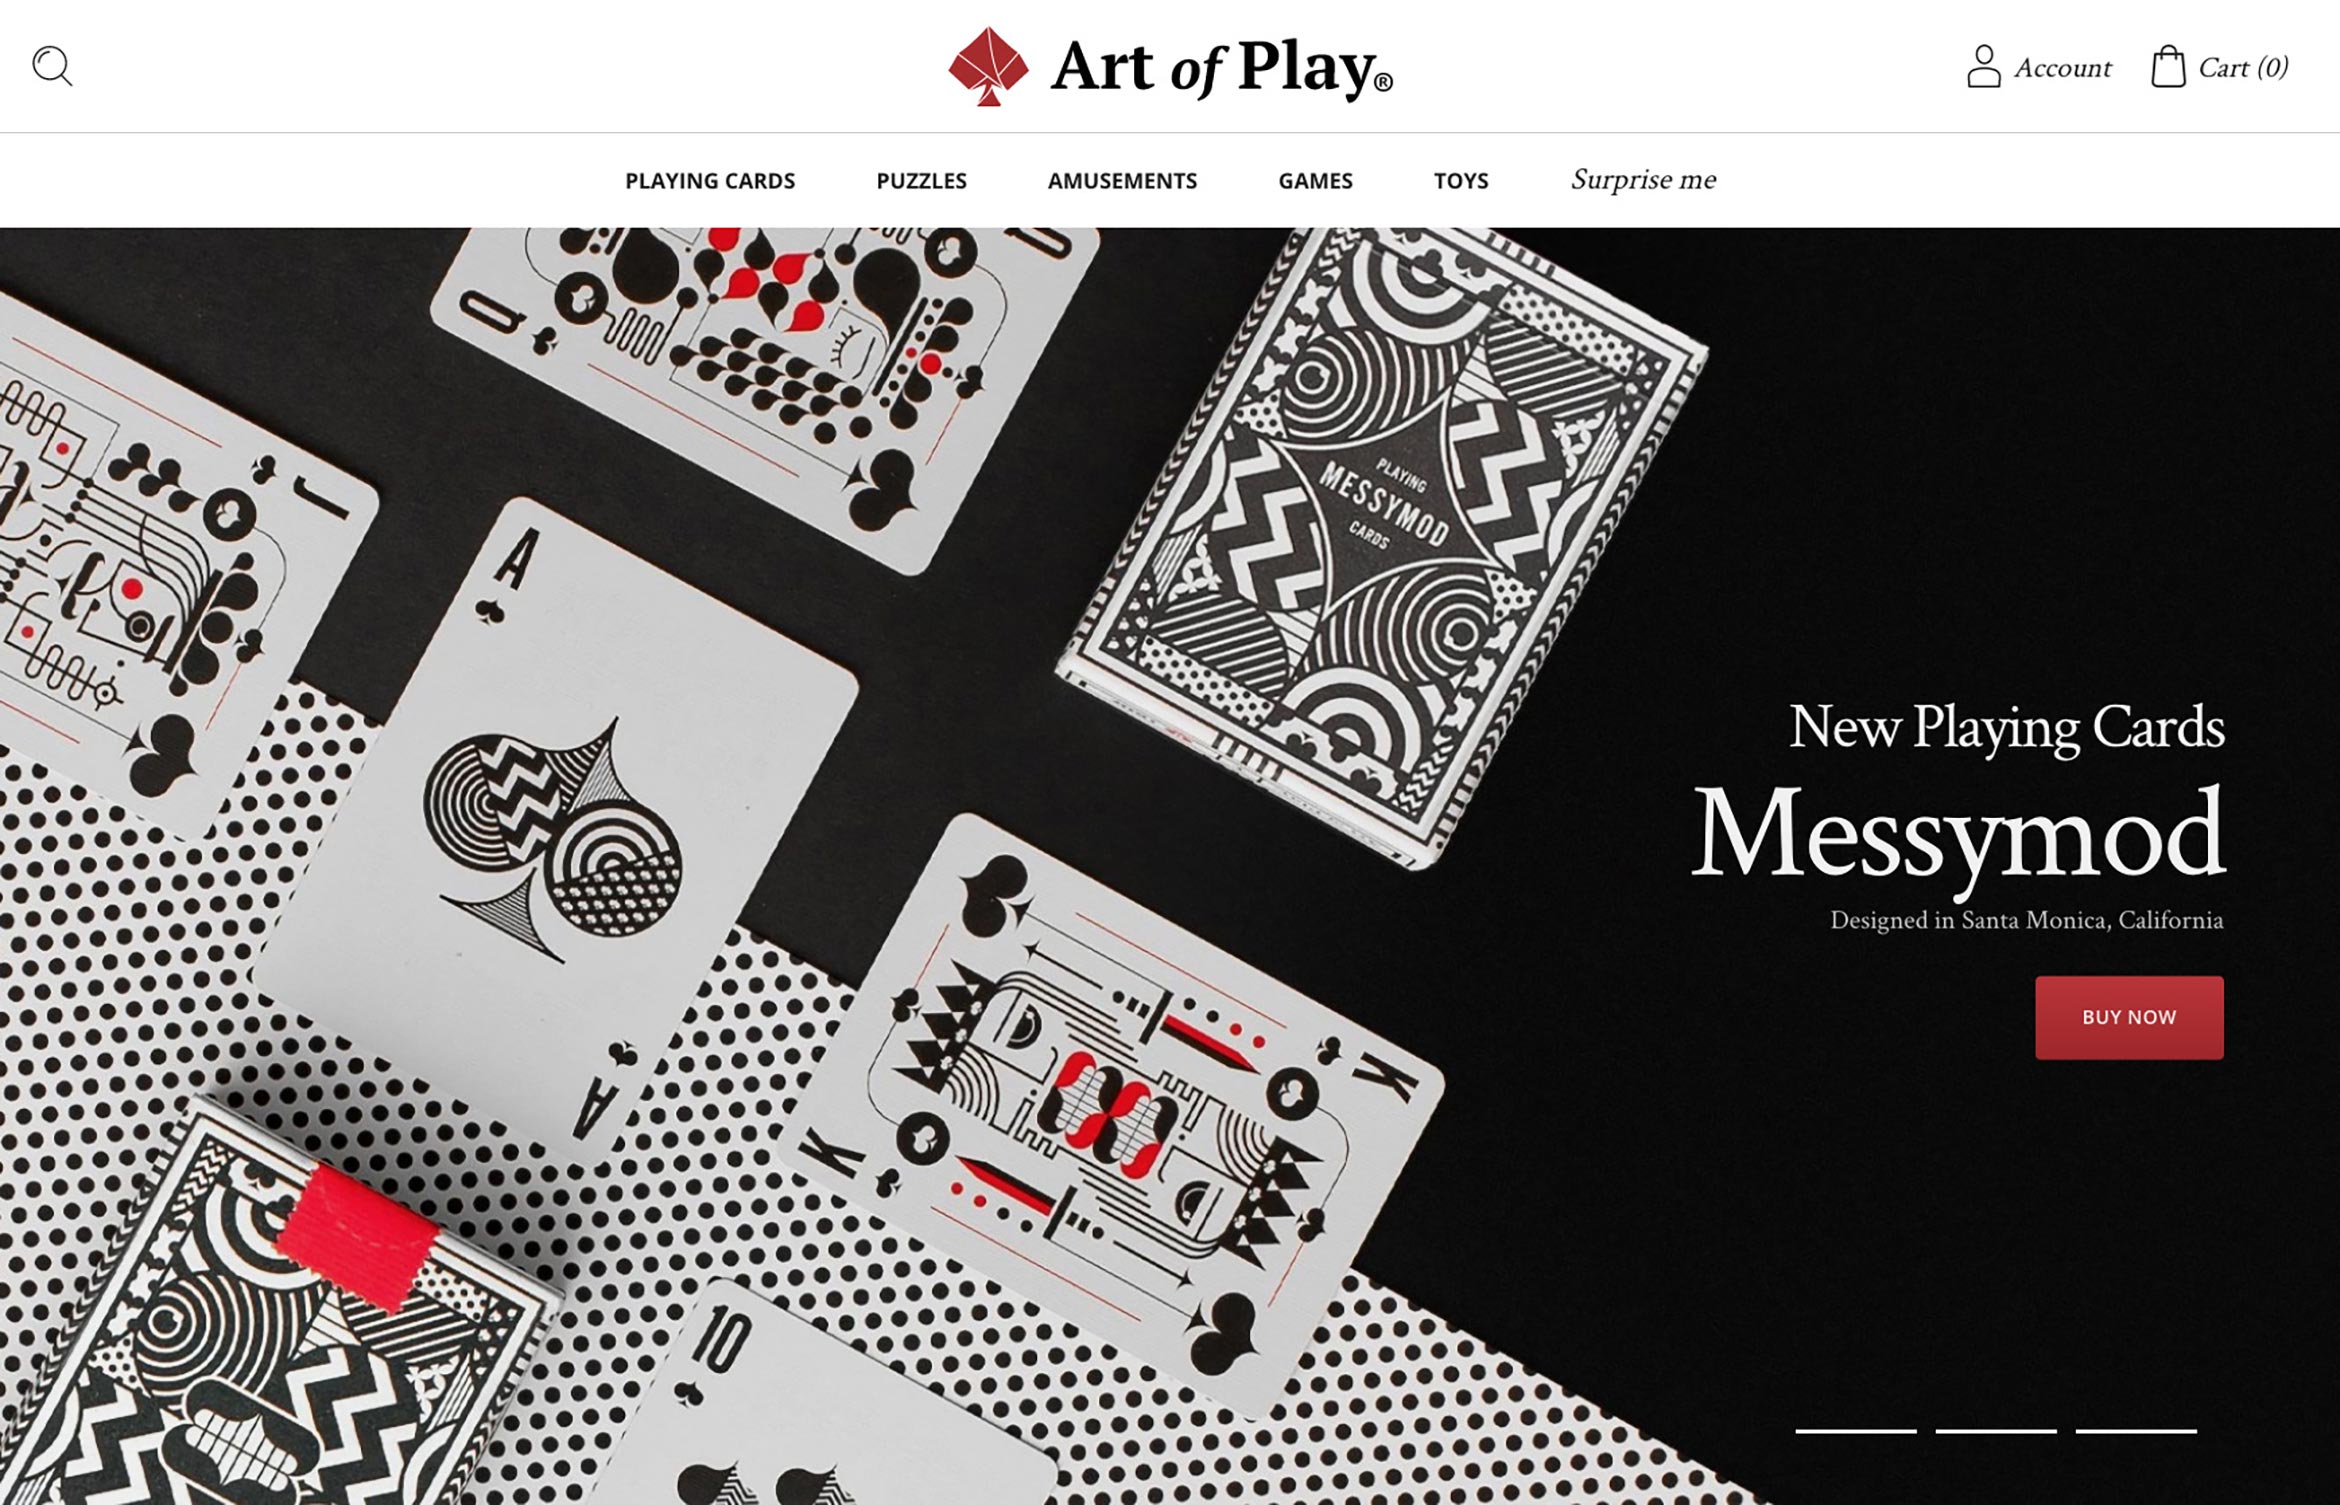 Art of Play - Playing Cards, Puzzles and Amusements